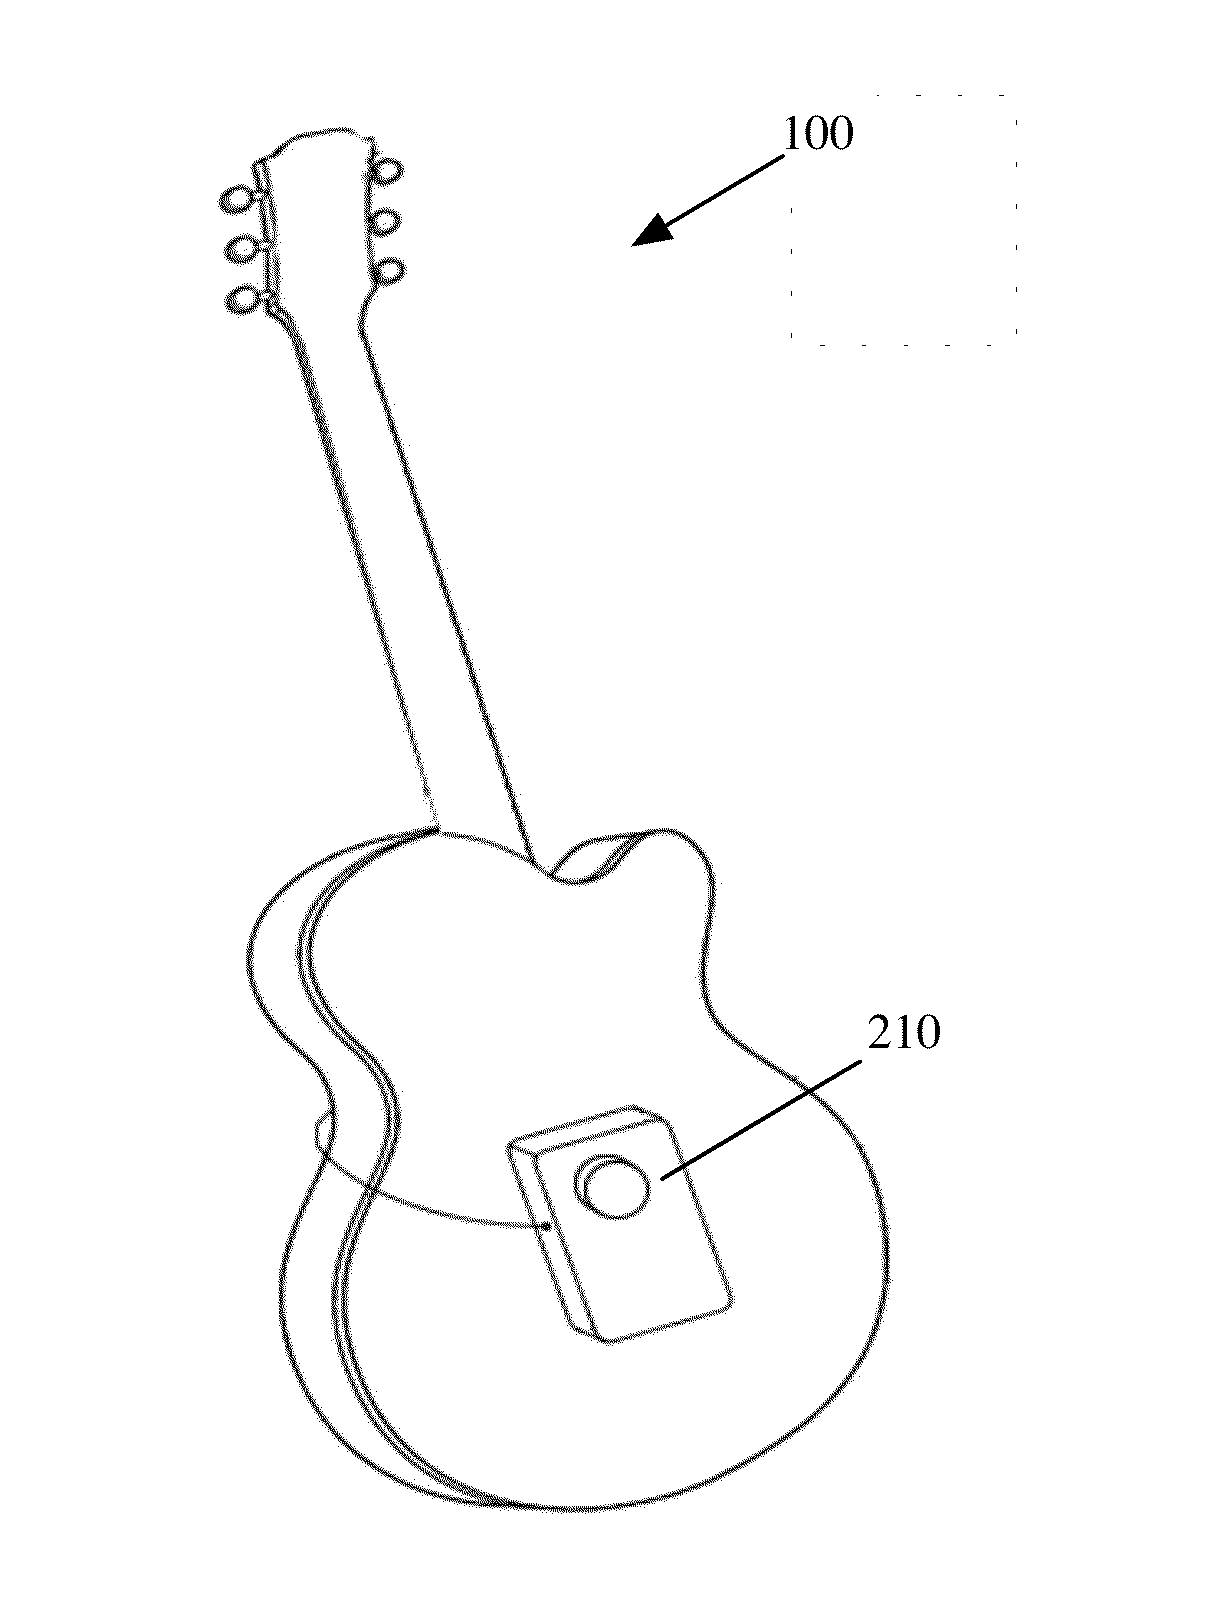 System and method for sound augmentation of acoustic musical instruments